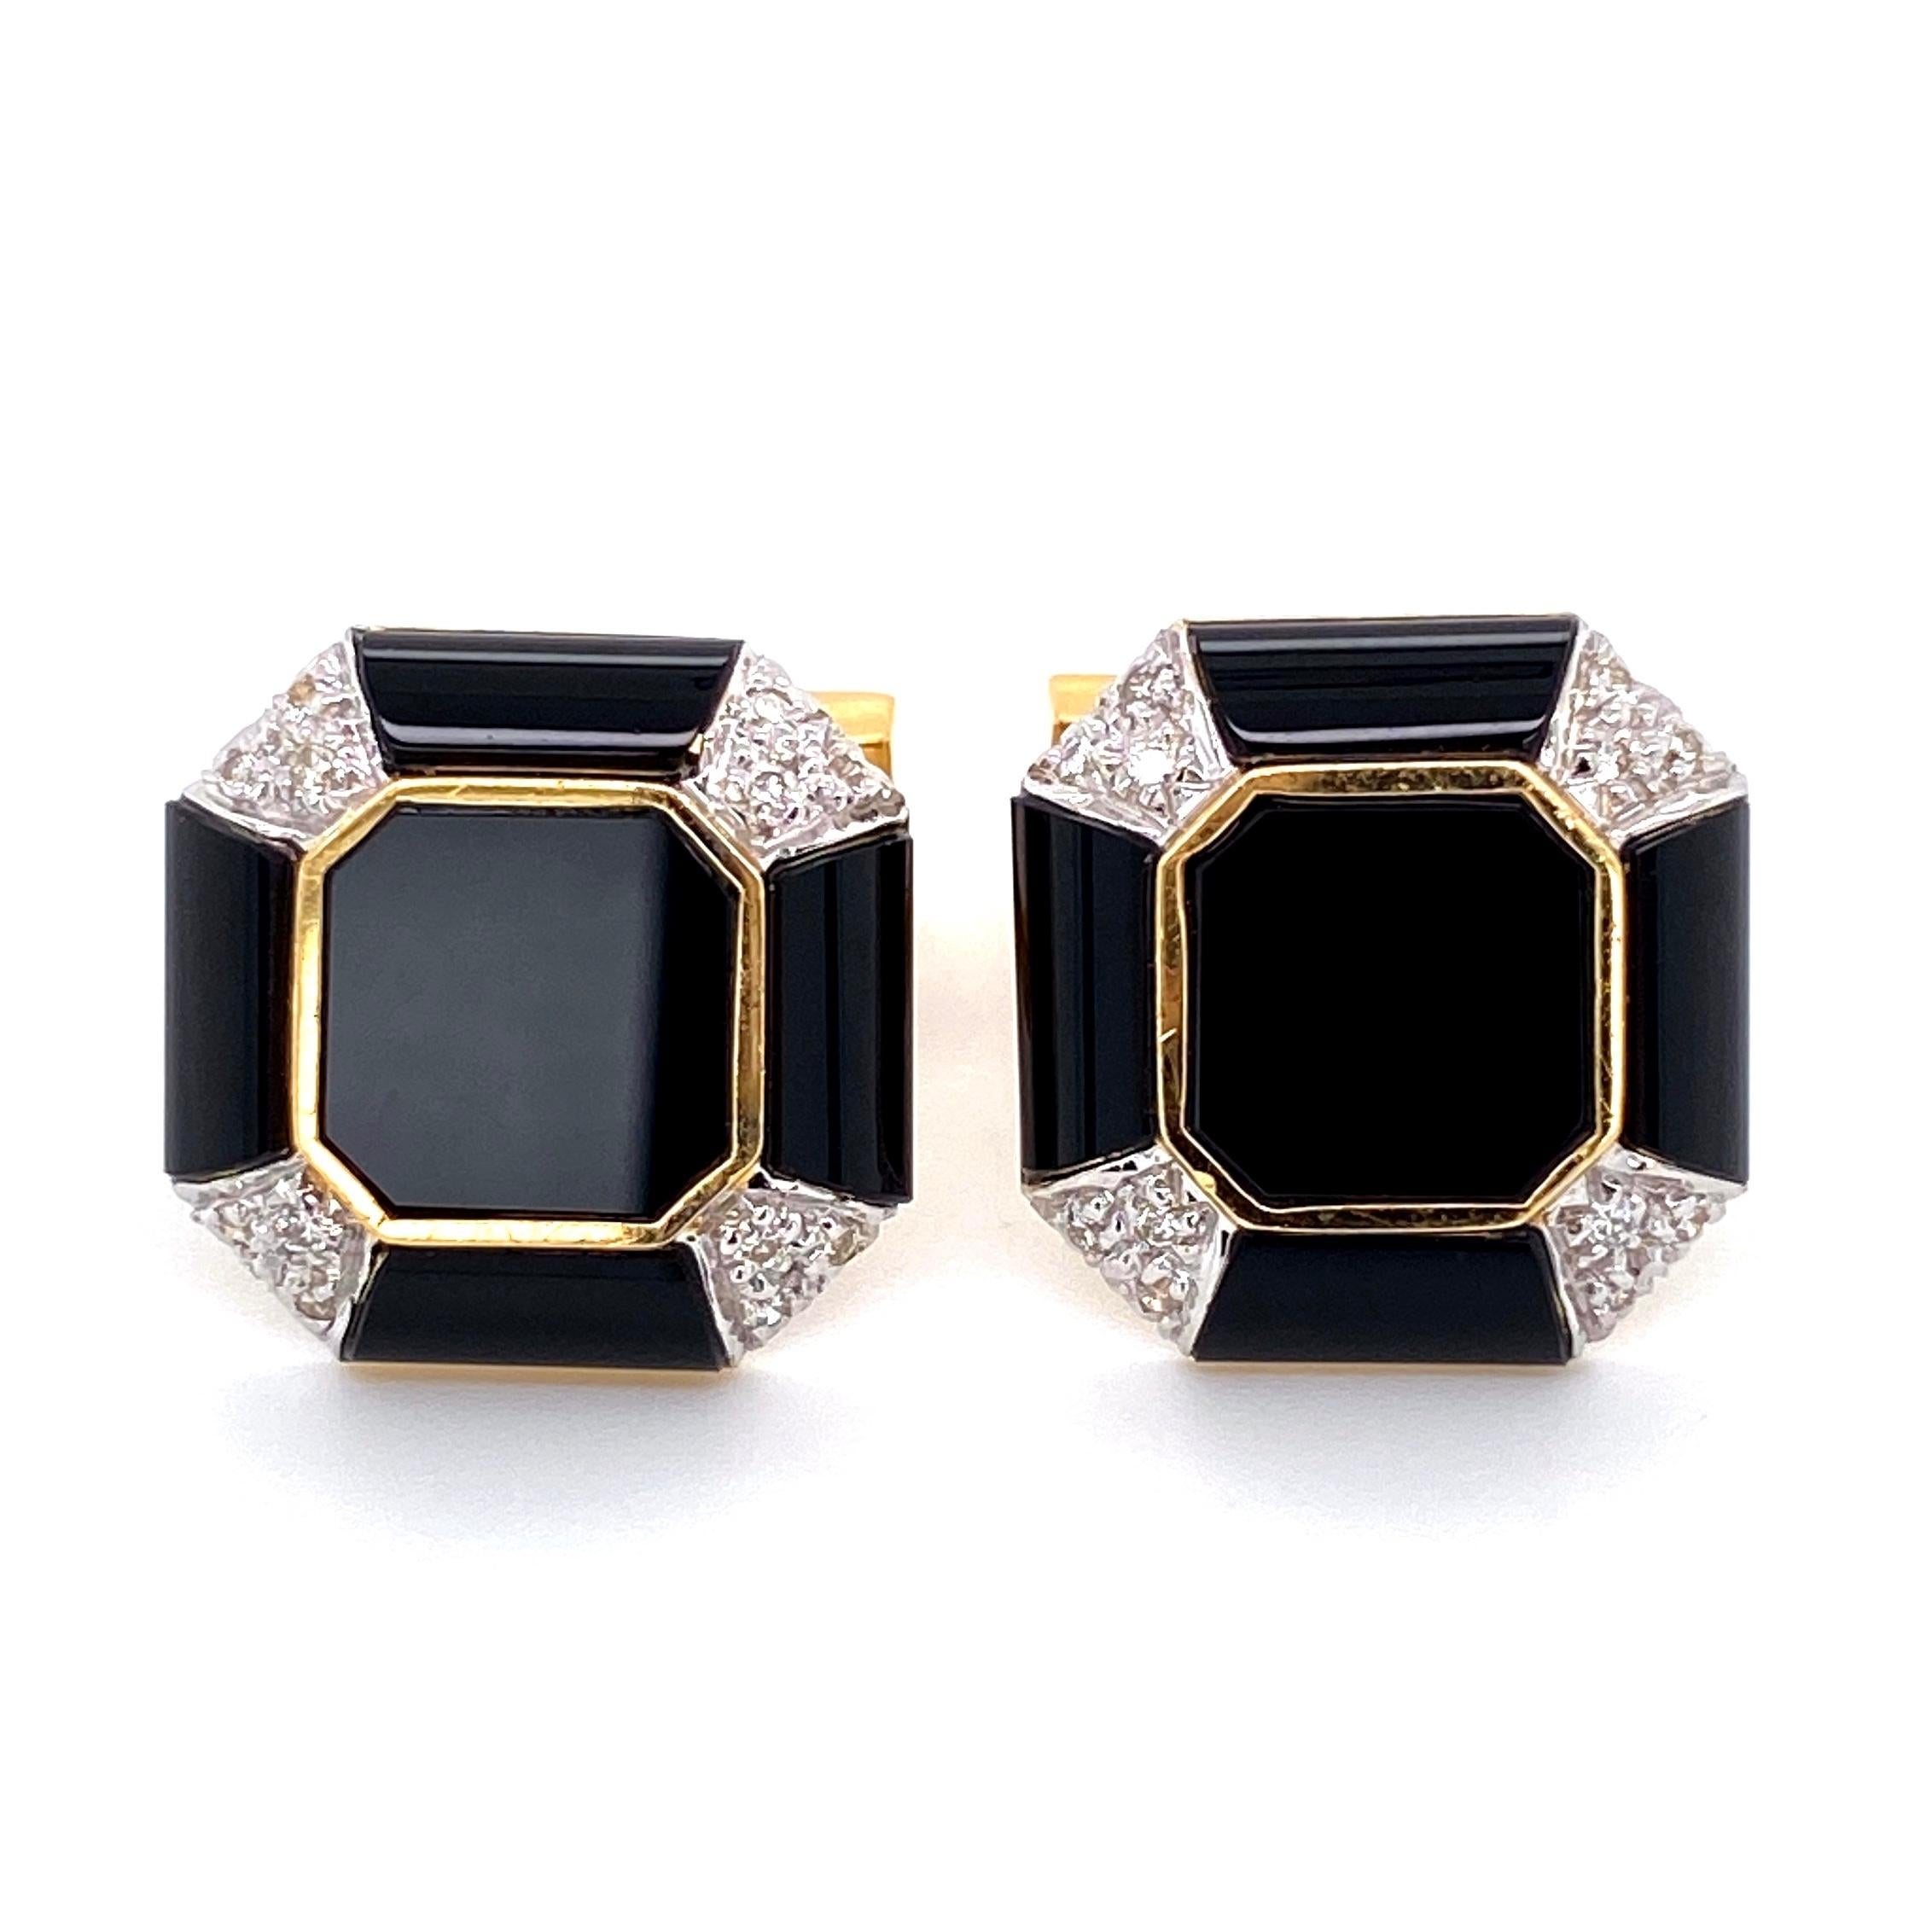 Classic Art Deco Style Onyx and Diamond Dress Set comprising Pair of Cuff links and three matching Shirt Studs, each centering an onyx each corner  pave set with 60 Diamonds weighing approx. .50 total Carat weight. Approx. sizes: Cufflinks: 0.81